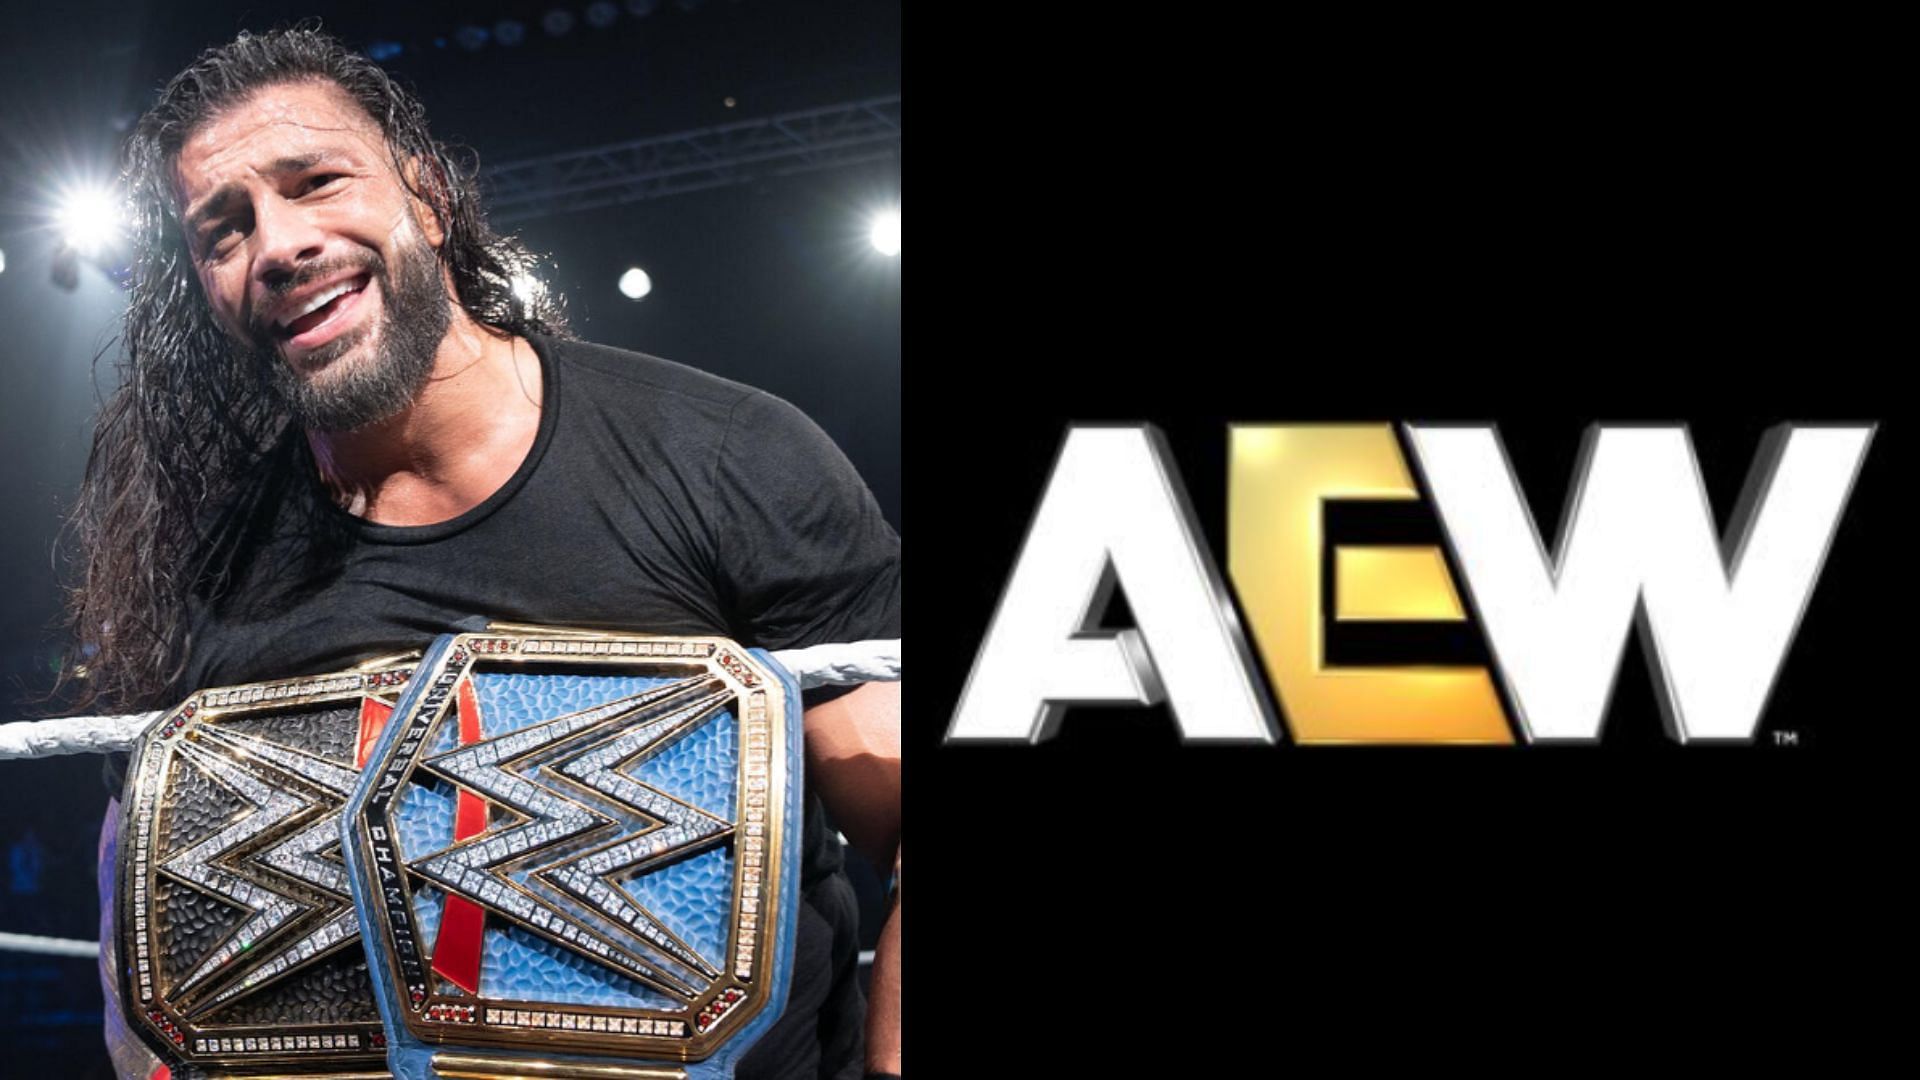 Roman Reigns is one of the biggest stars of WWE [Image Credits: WWE